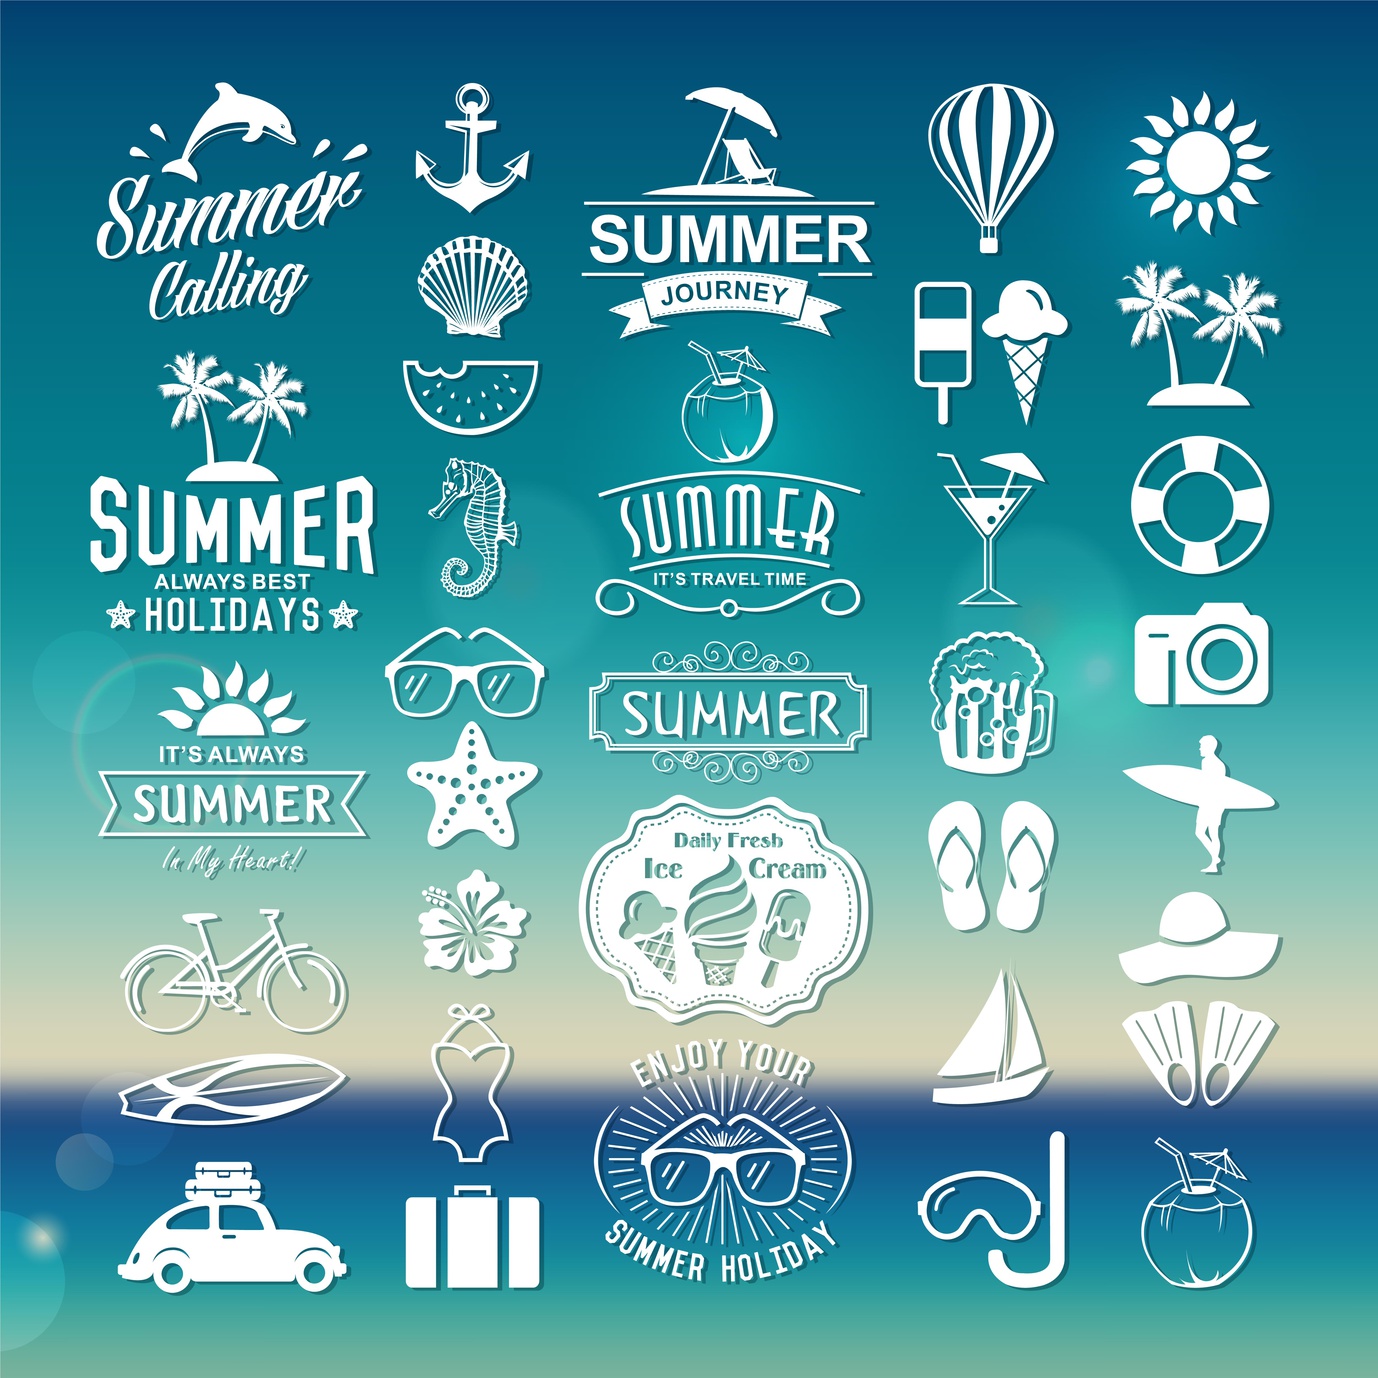 5 Travel Logo Design Ideas That Will Attract Tourists • Online ...